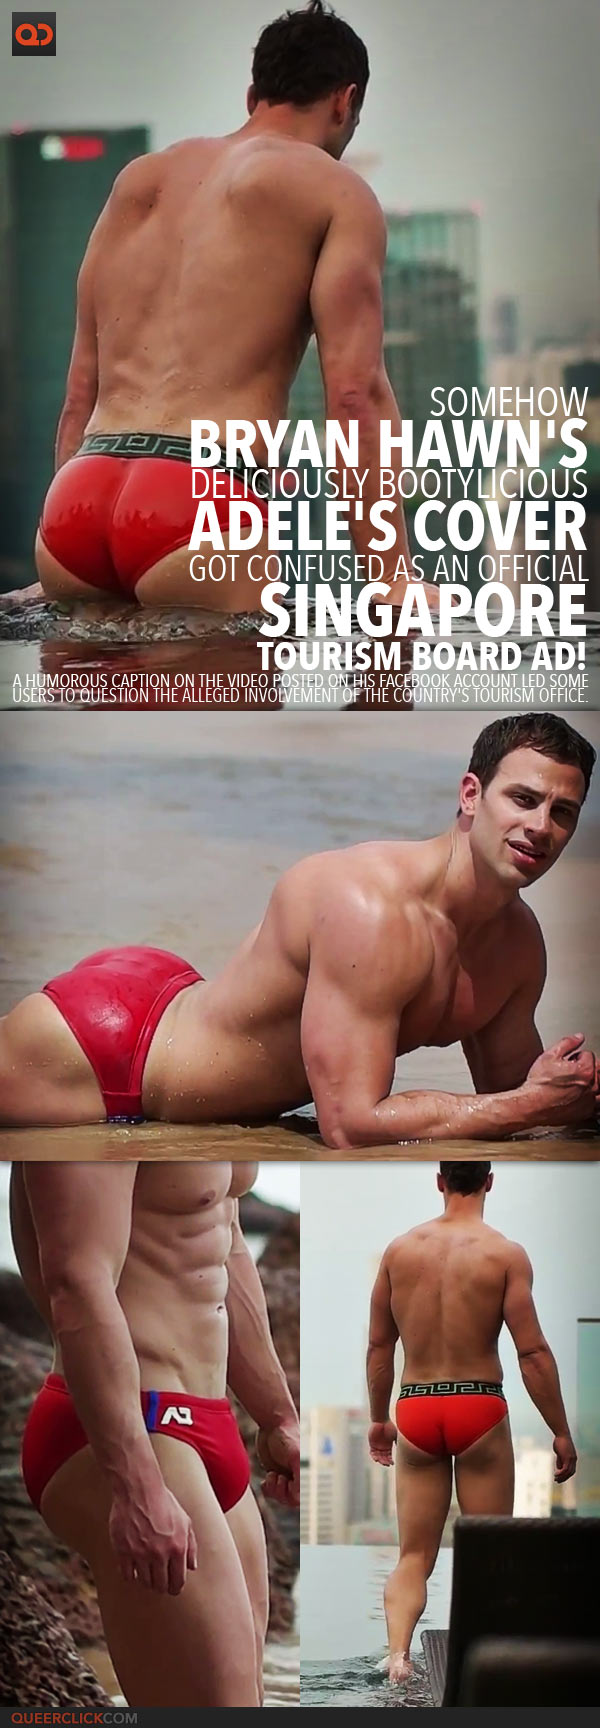 Somehow Bryan Hawn's Deliciously Bootylicious Adele's Cover Got Confused As An Official Singapore Tourism Board Ad!